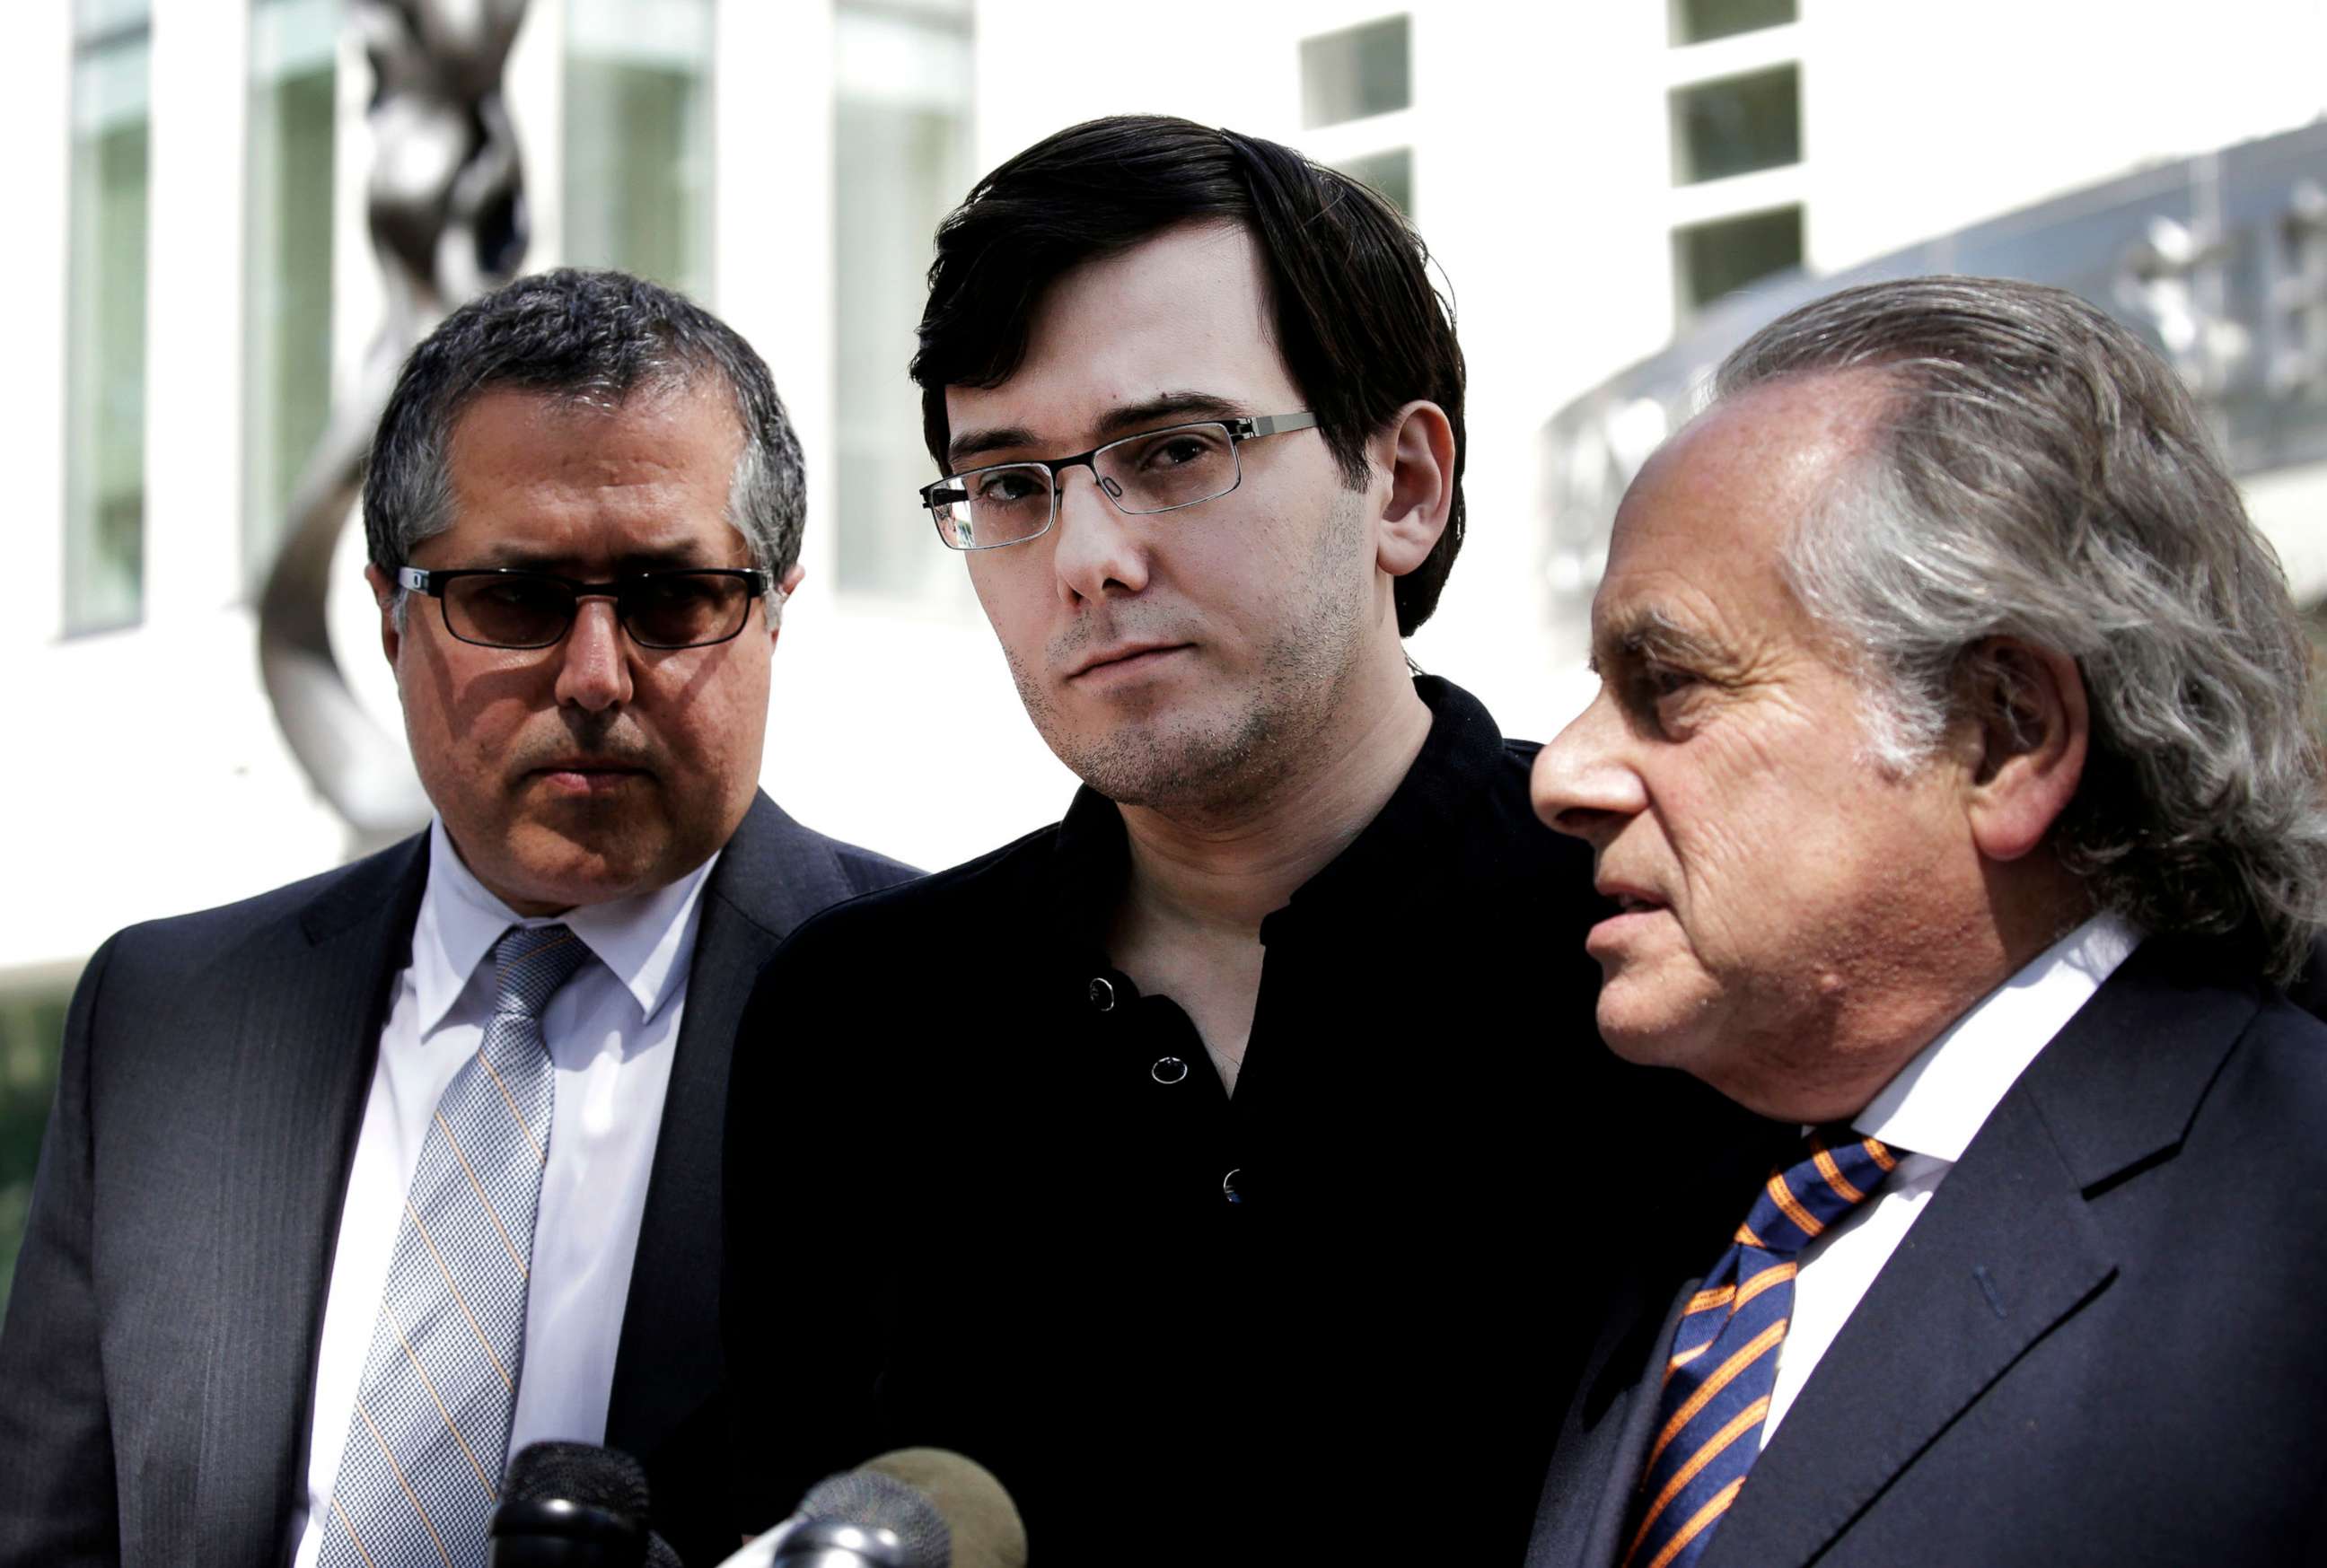 PHOTO: Martin Shkreli, former chief executive officer of Turing Pharmaceuticals AG, center, listens while his attorney Benjamin Brafman, right, speak to members of the media outside federal court in Brooklyn, N.Y., Aug. 4, 2017.